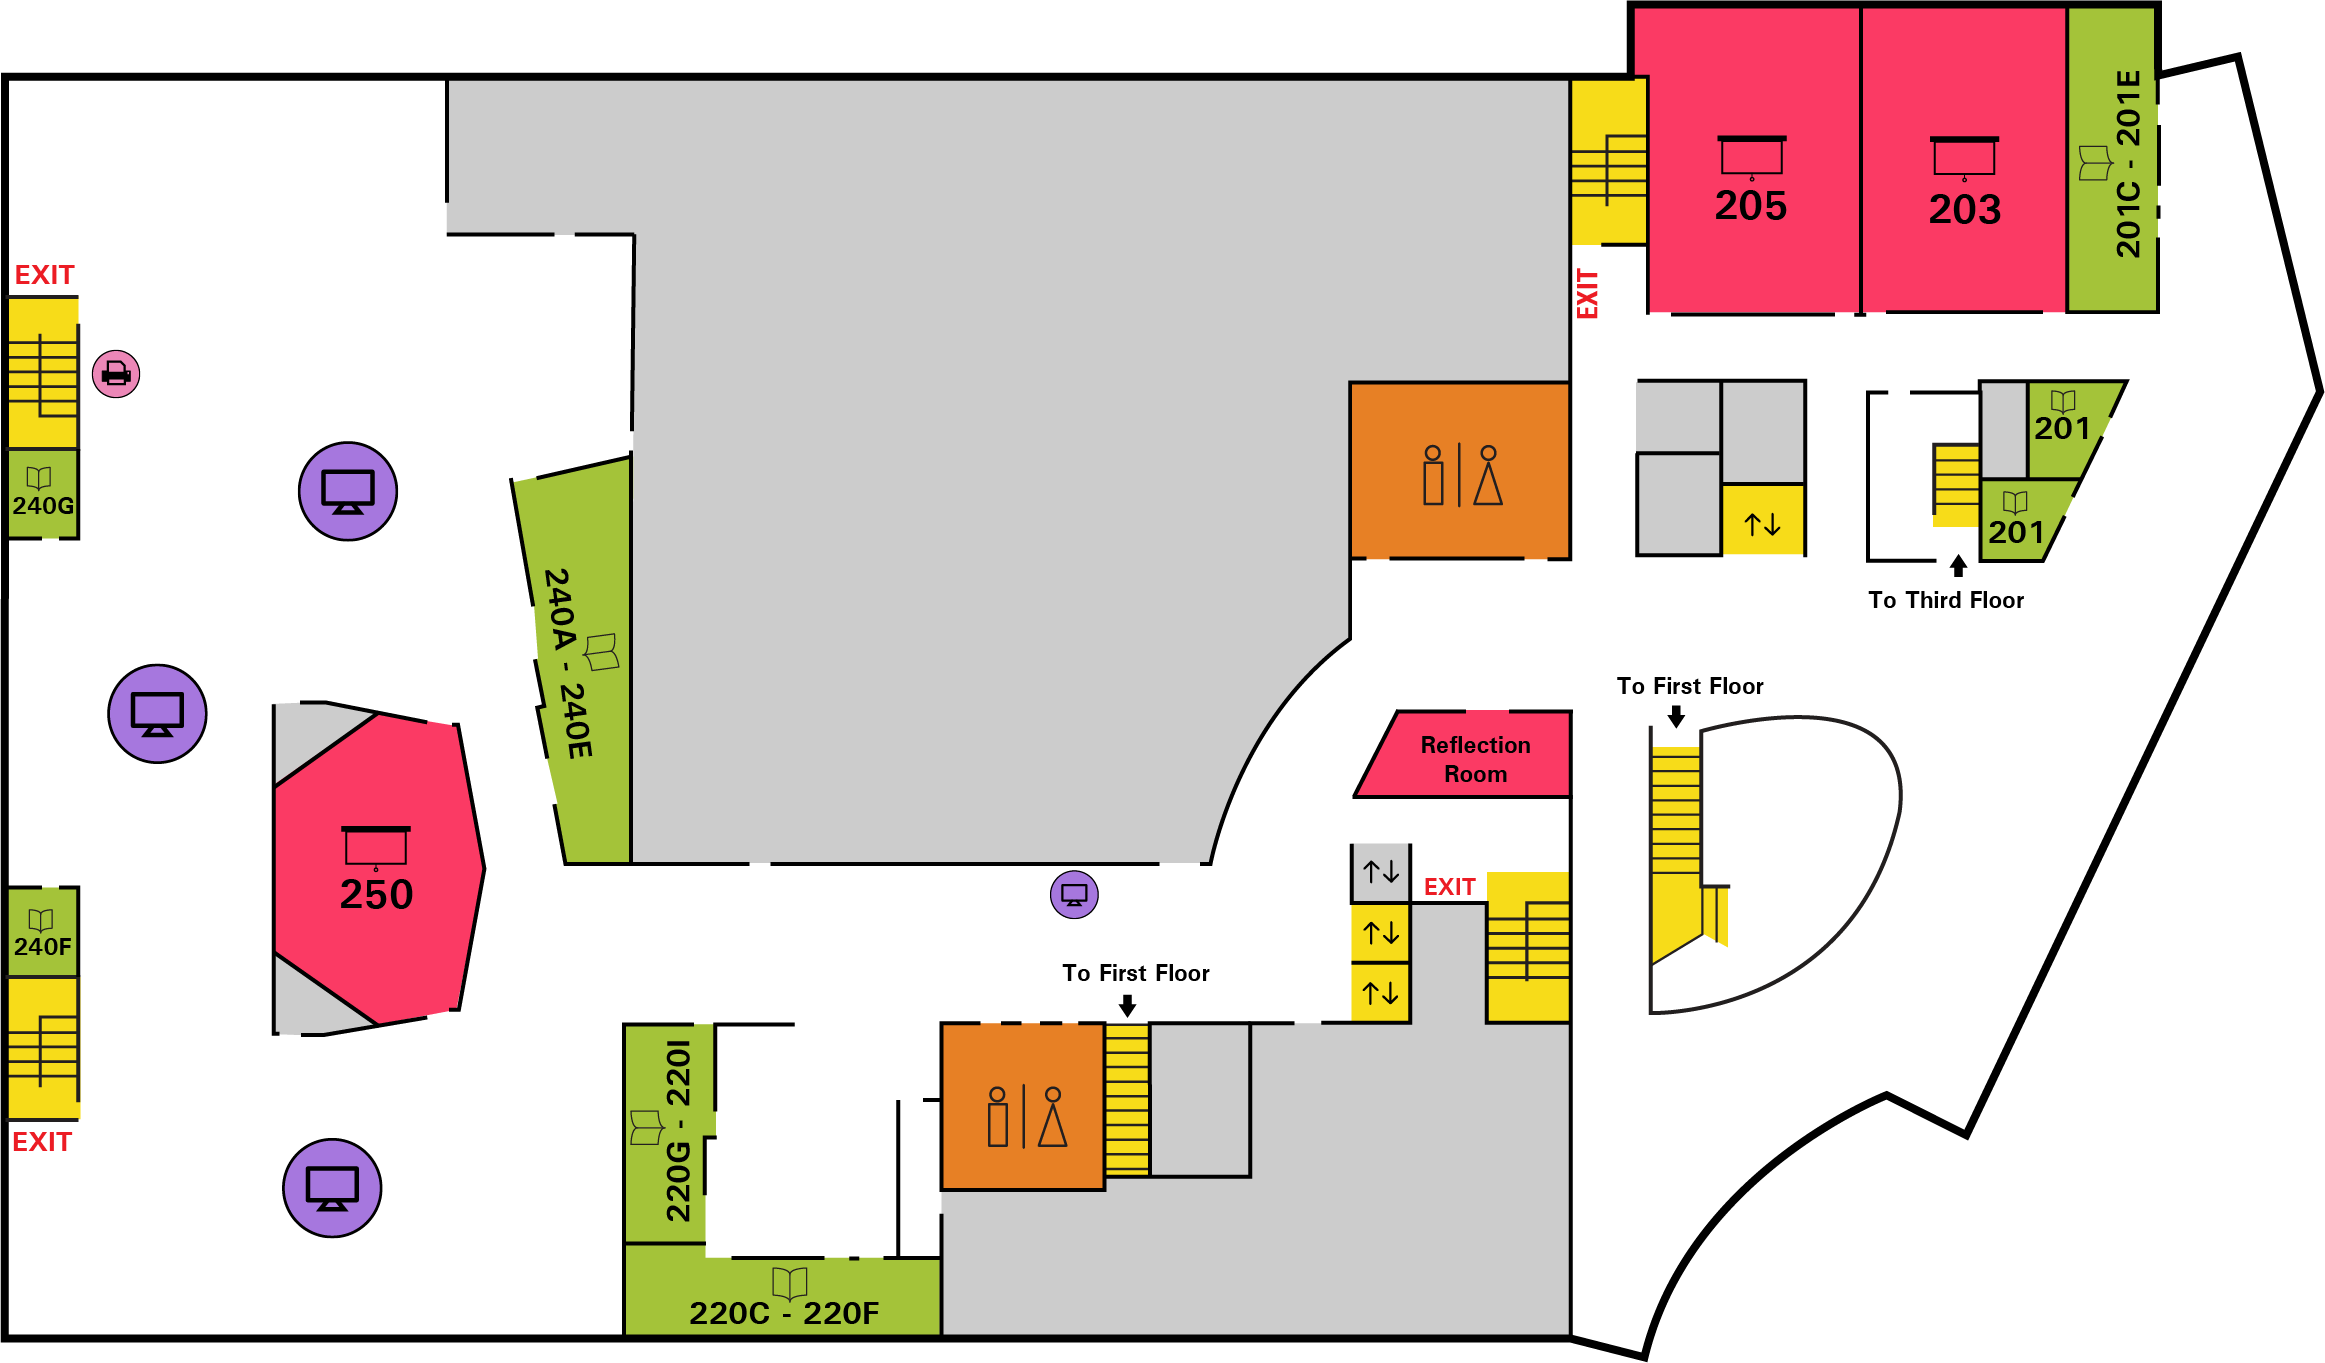 Floor map of the second floor of Cabell Library